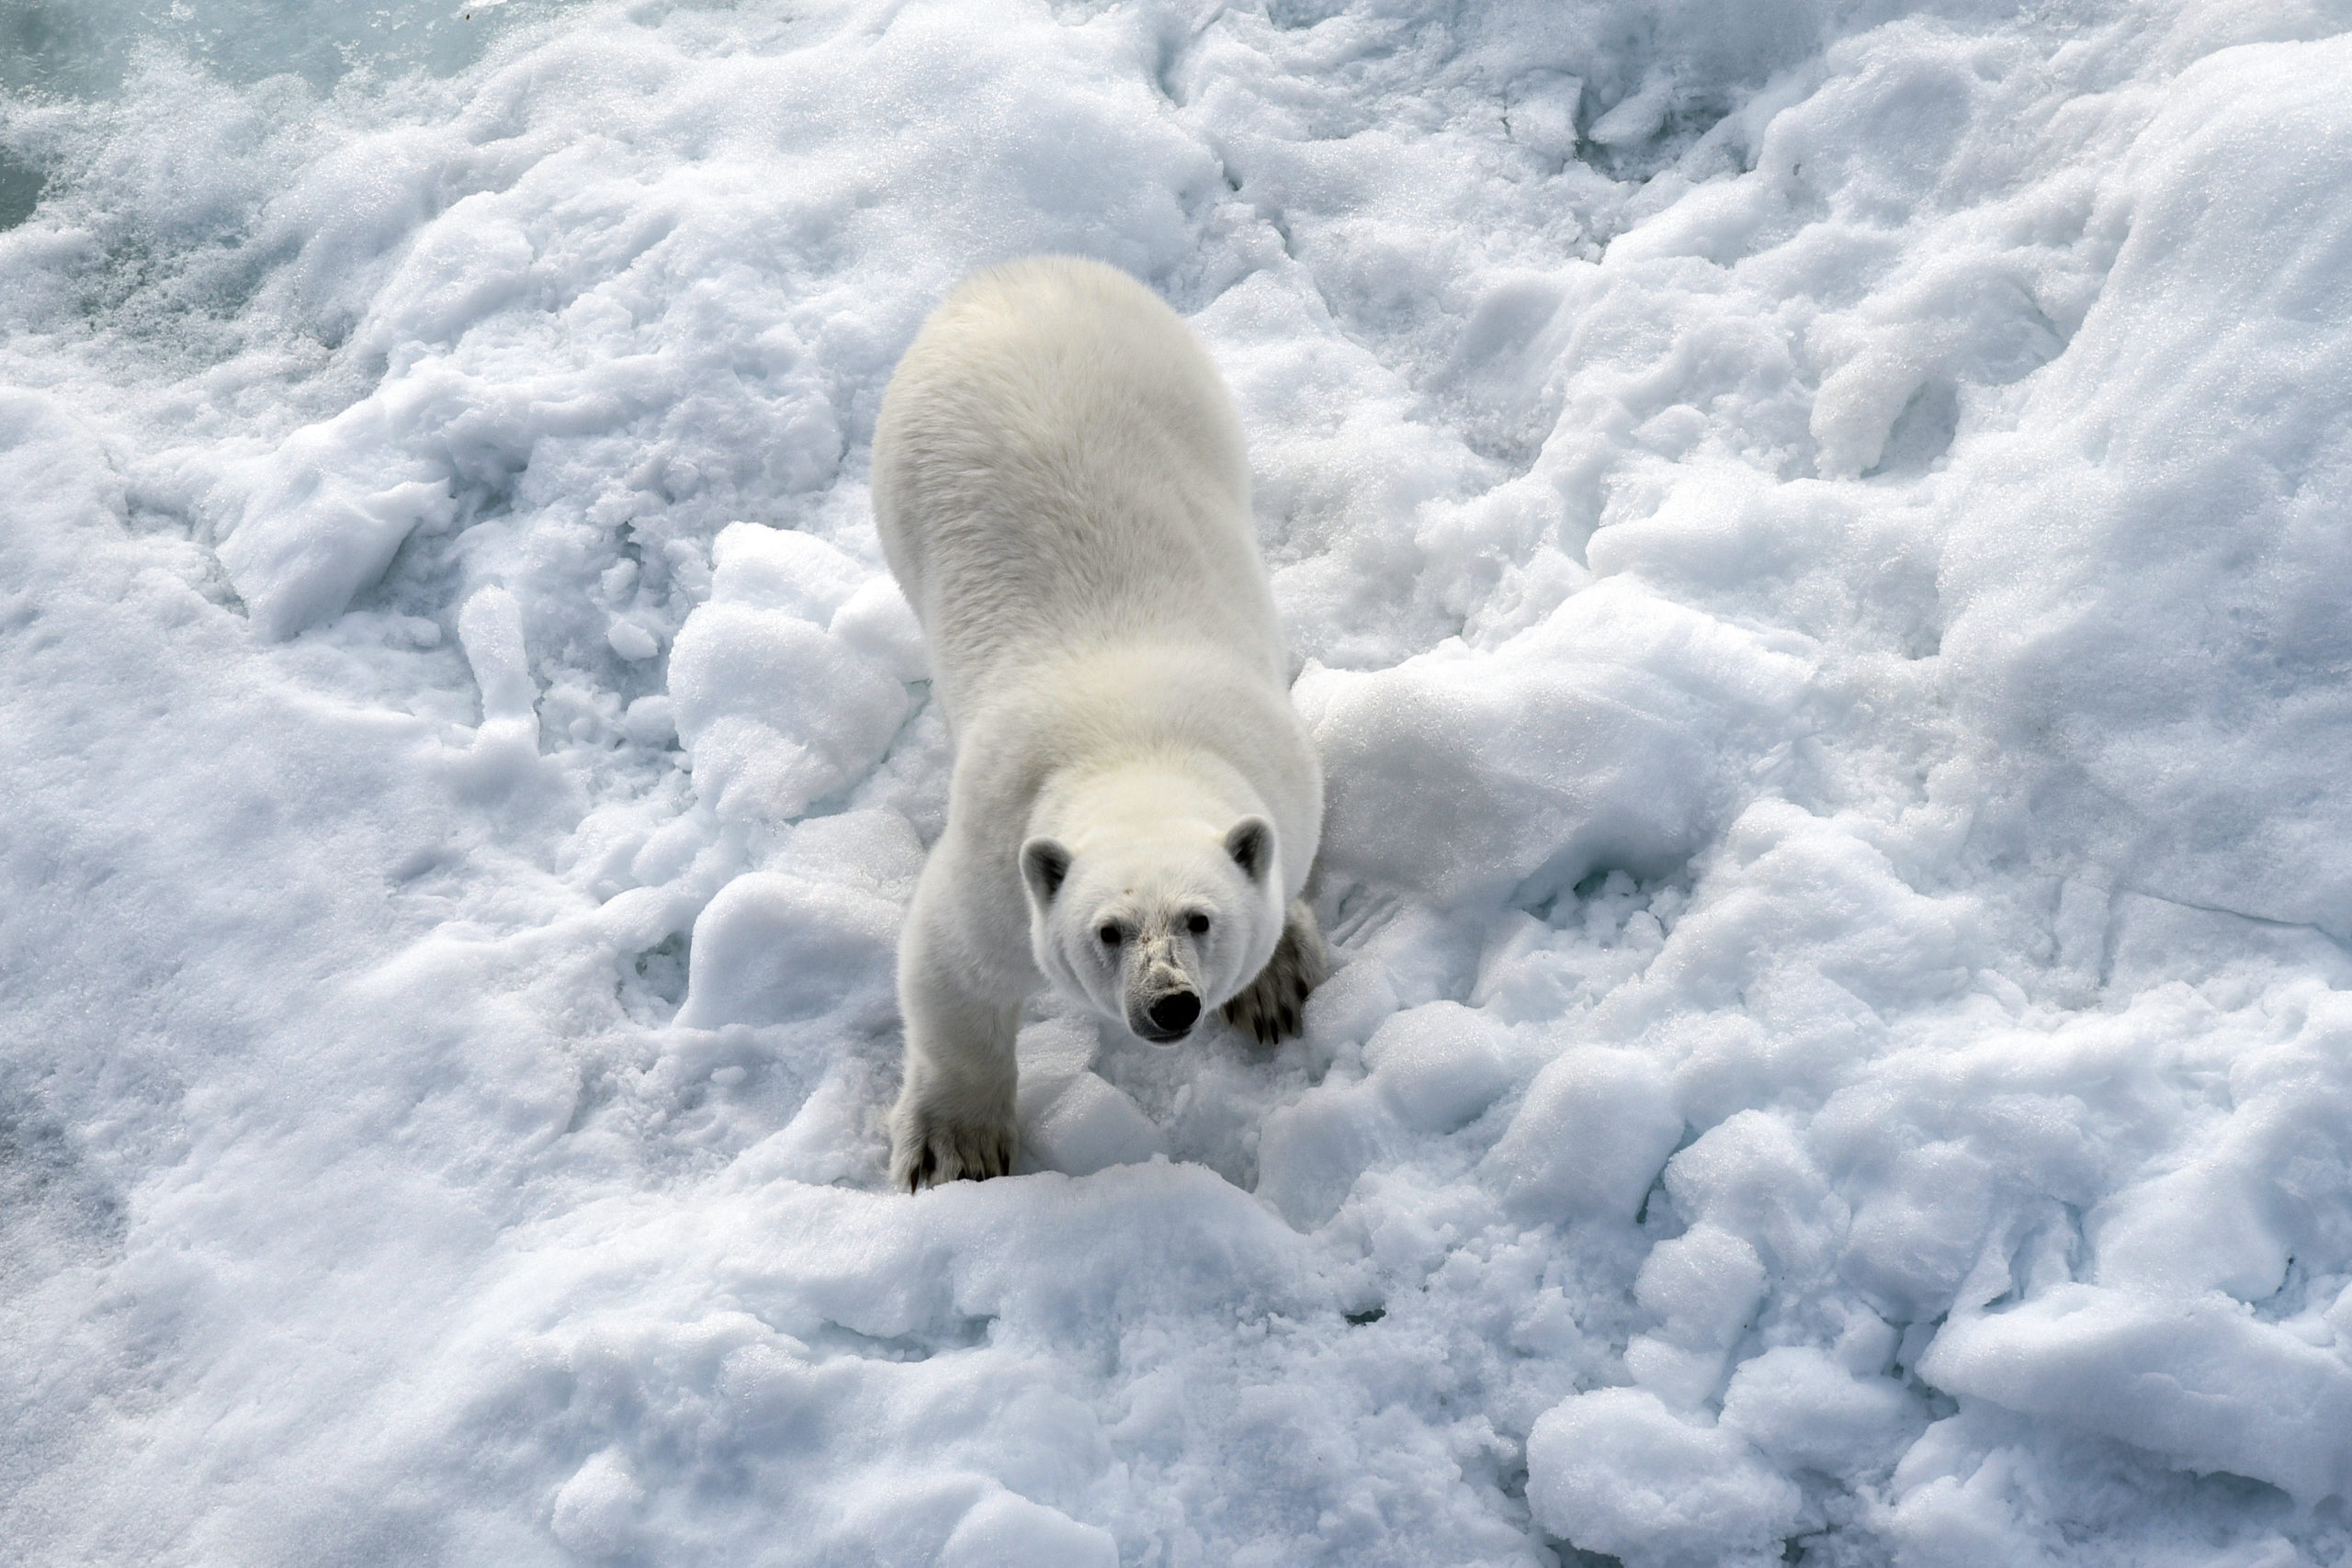 Russian researchers are seeing more cannibalism among polar bears -  ArcticToday